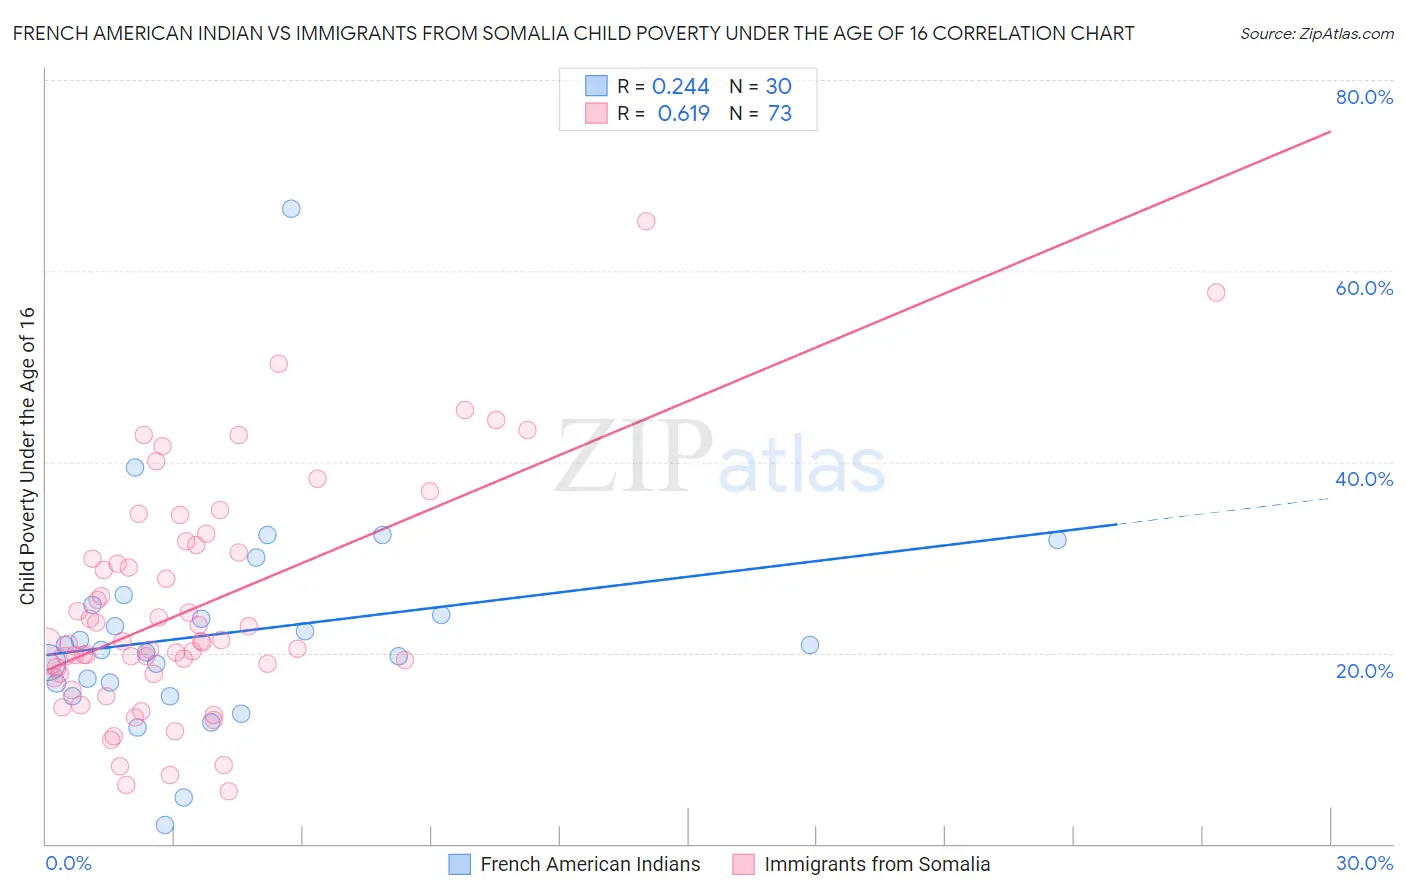 French American Indian vs Immigrants from Somalia Child Poverty Under the Age of 16